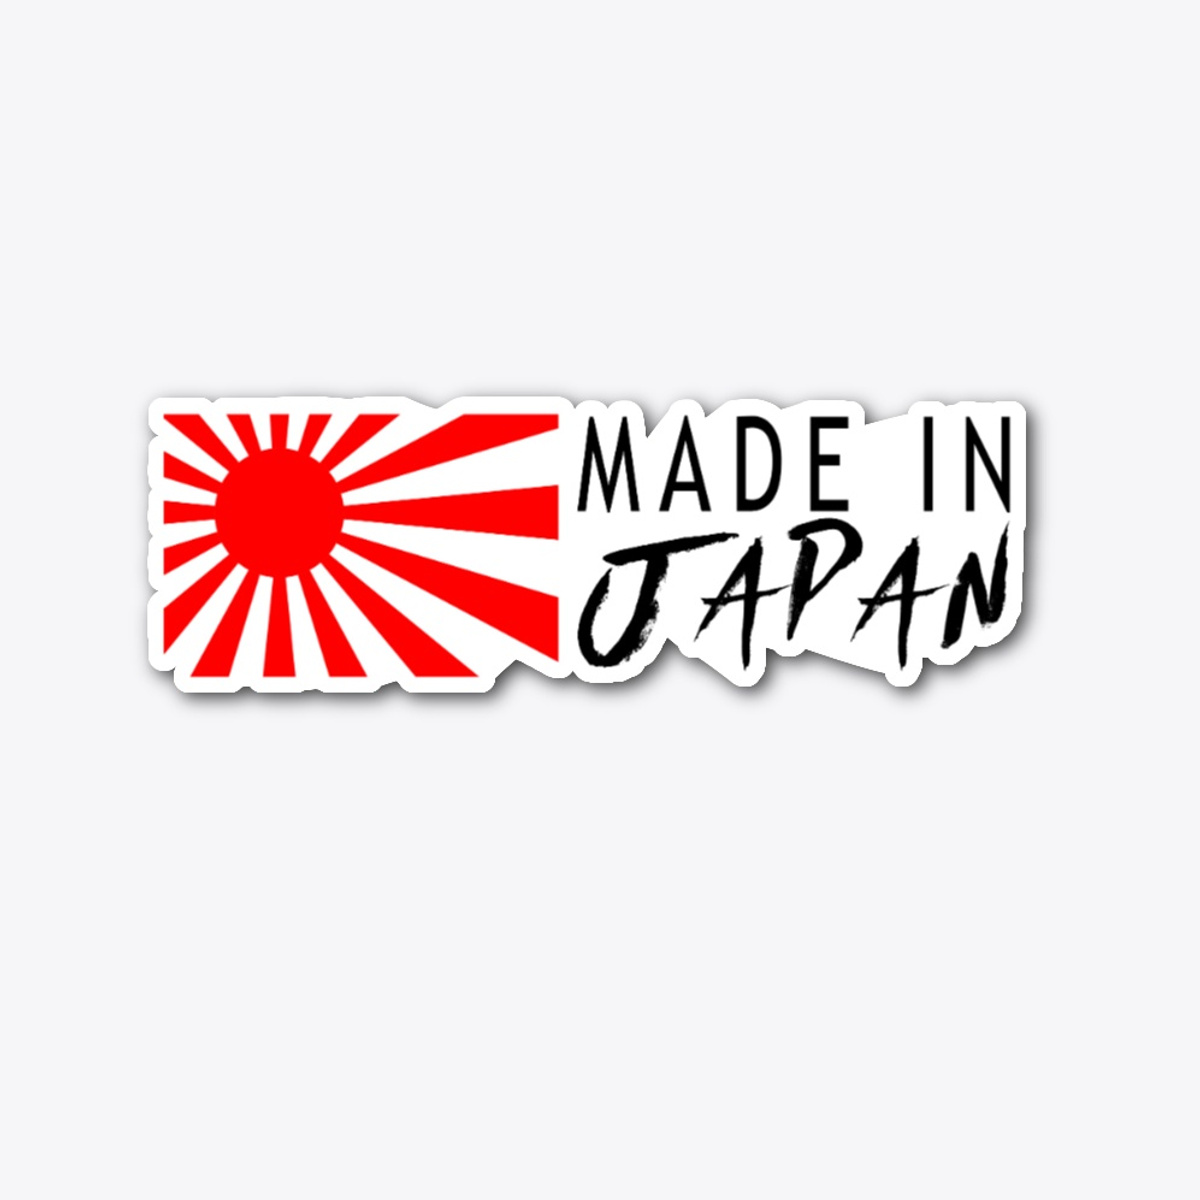 Made in Japan! | thatjdmfeed